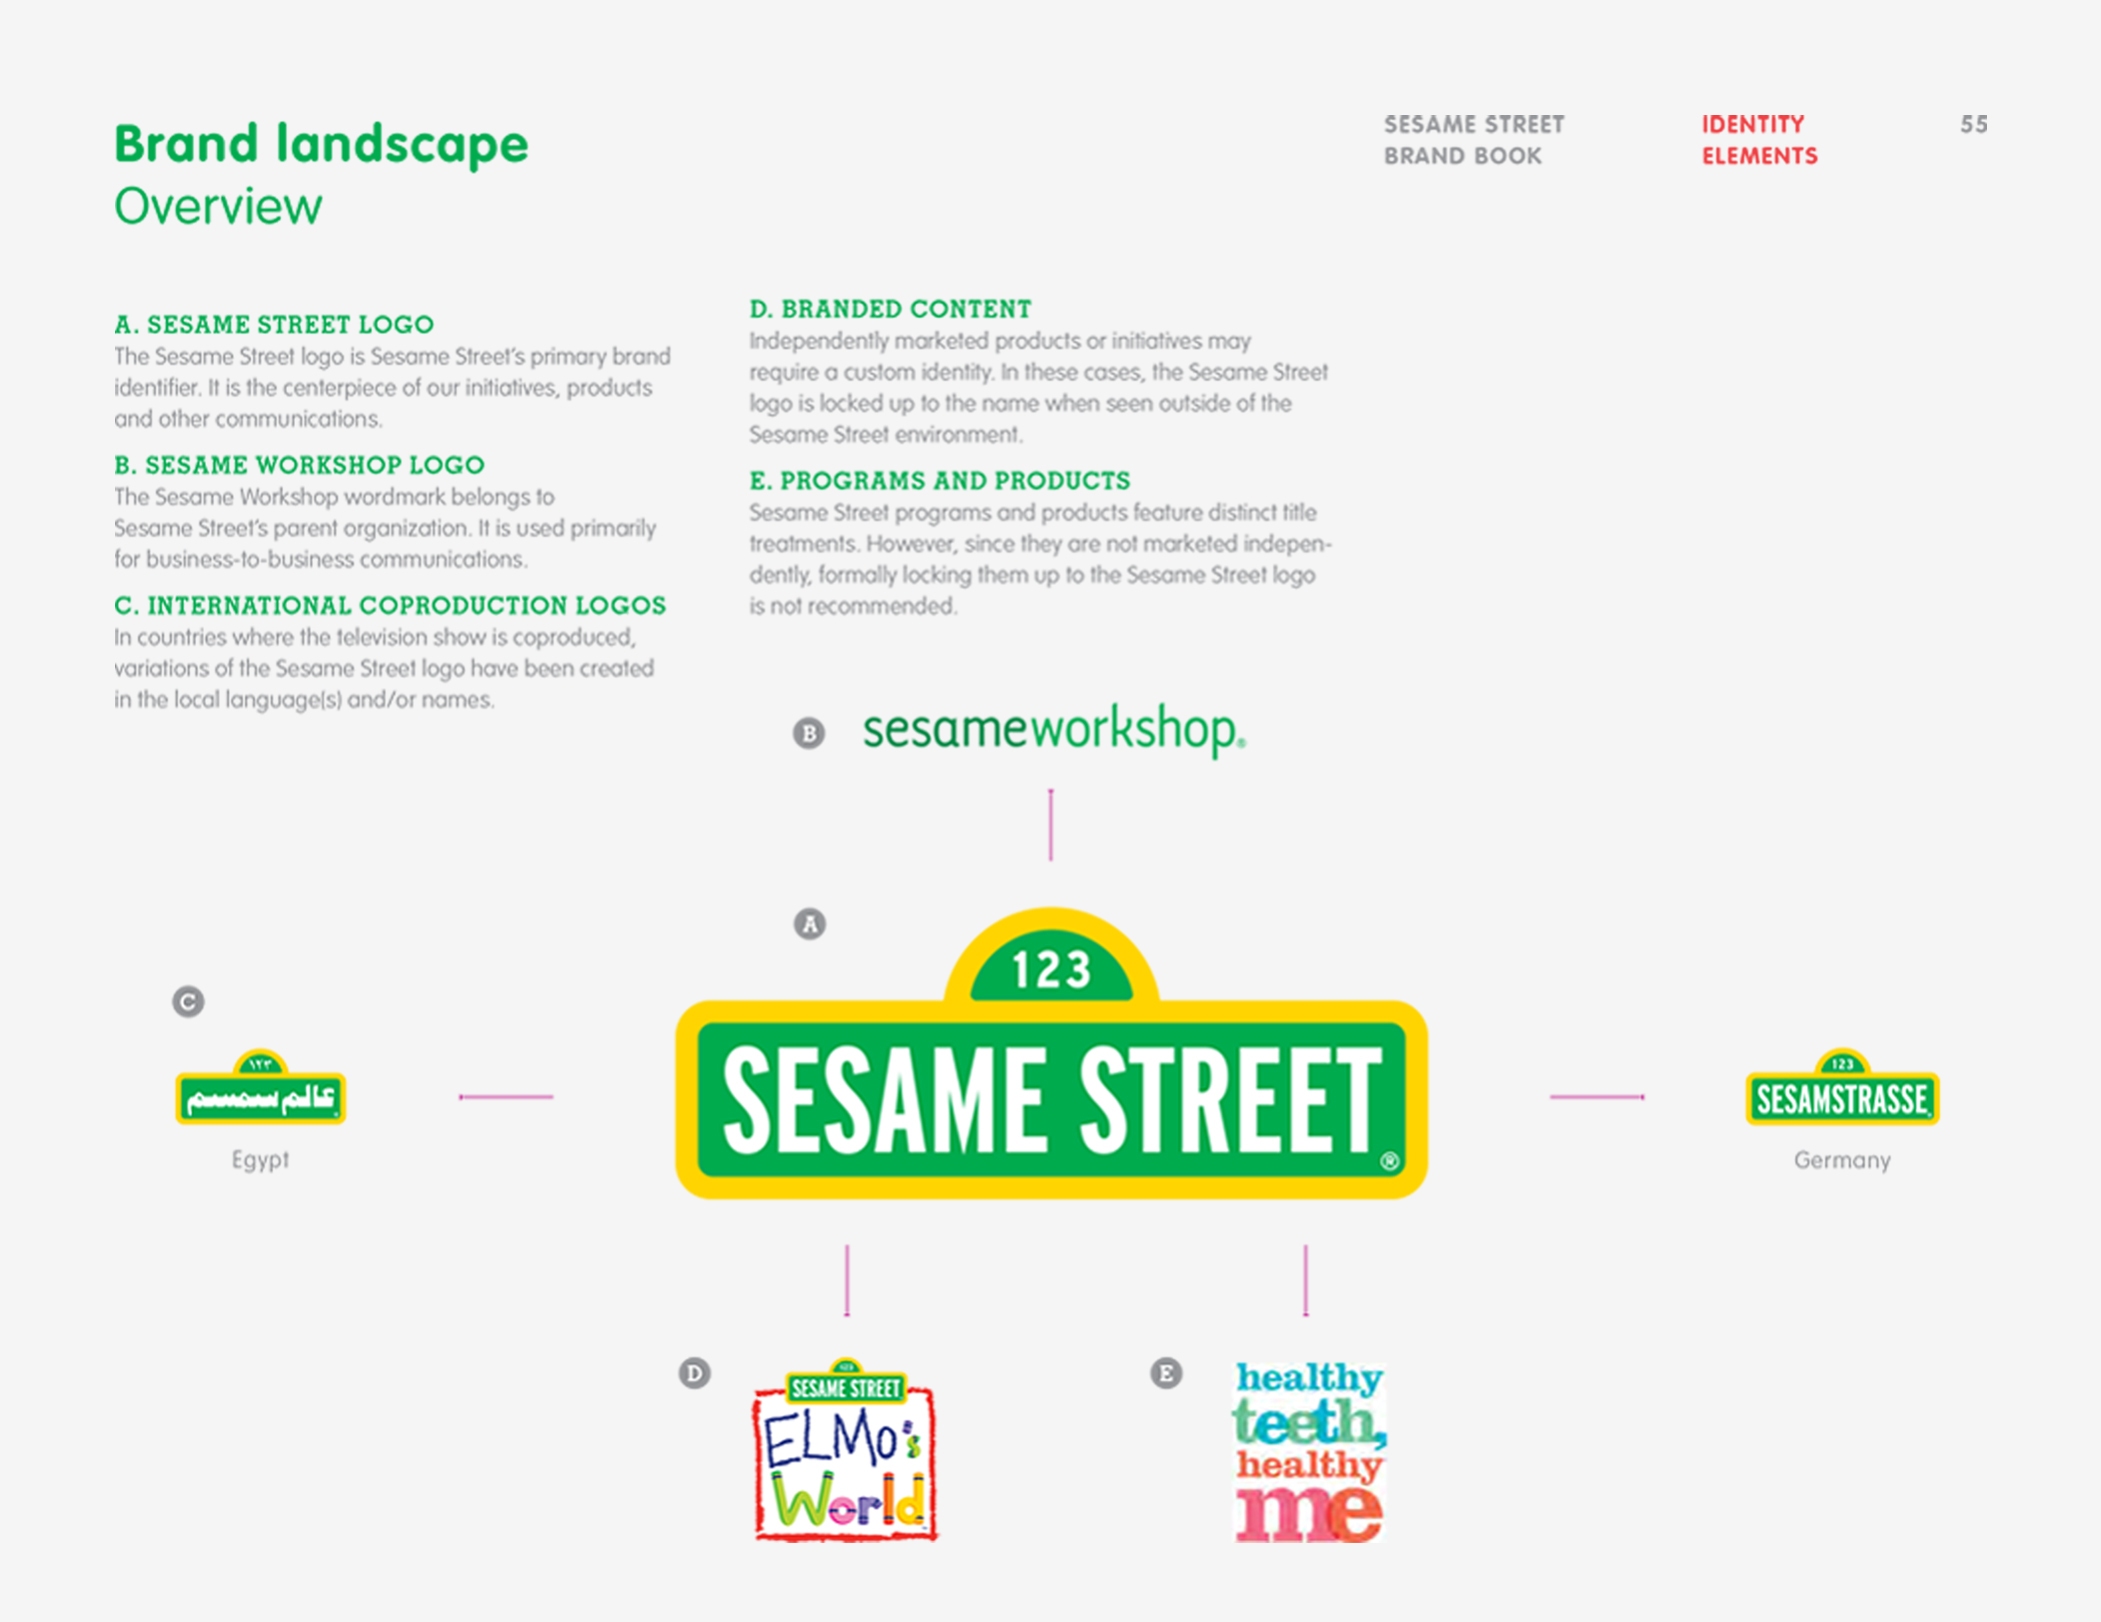 The Brand Landscape Overview page from the Sesame Workshop Brand Book showing usage guideline for several brand logotypes.